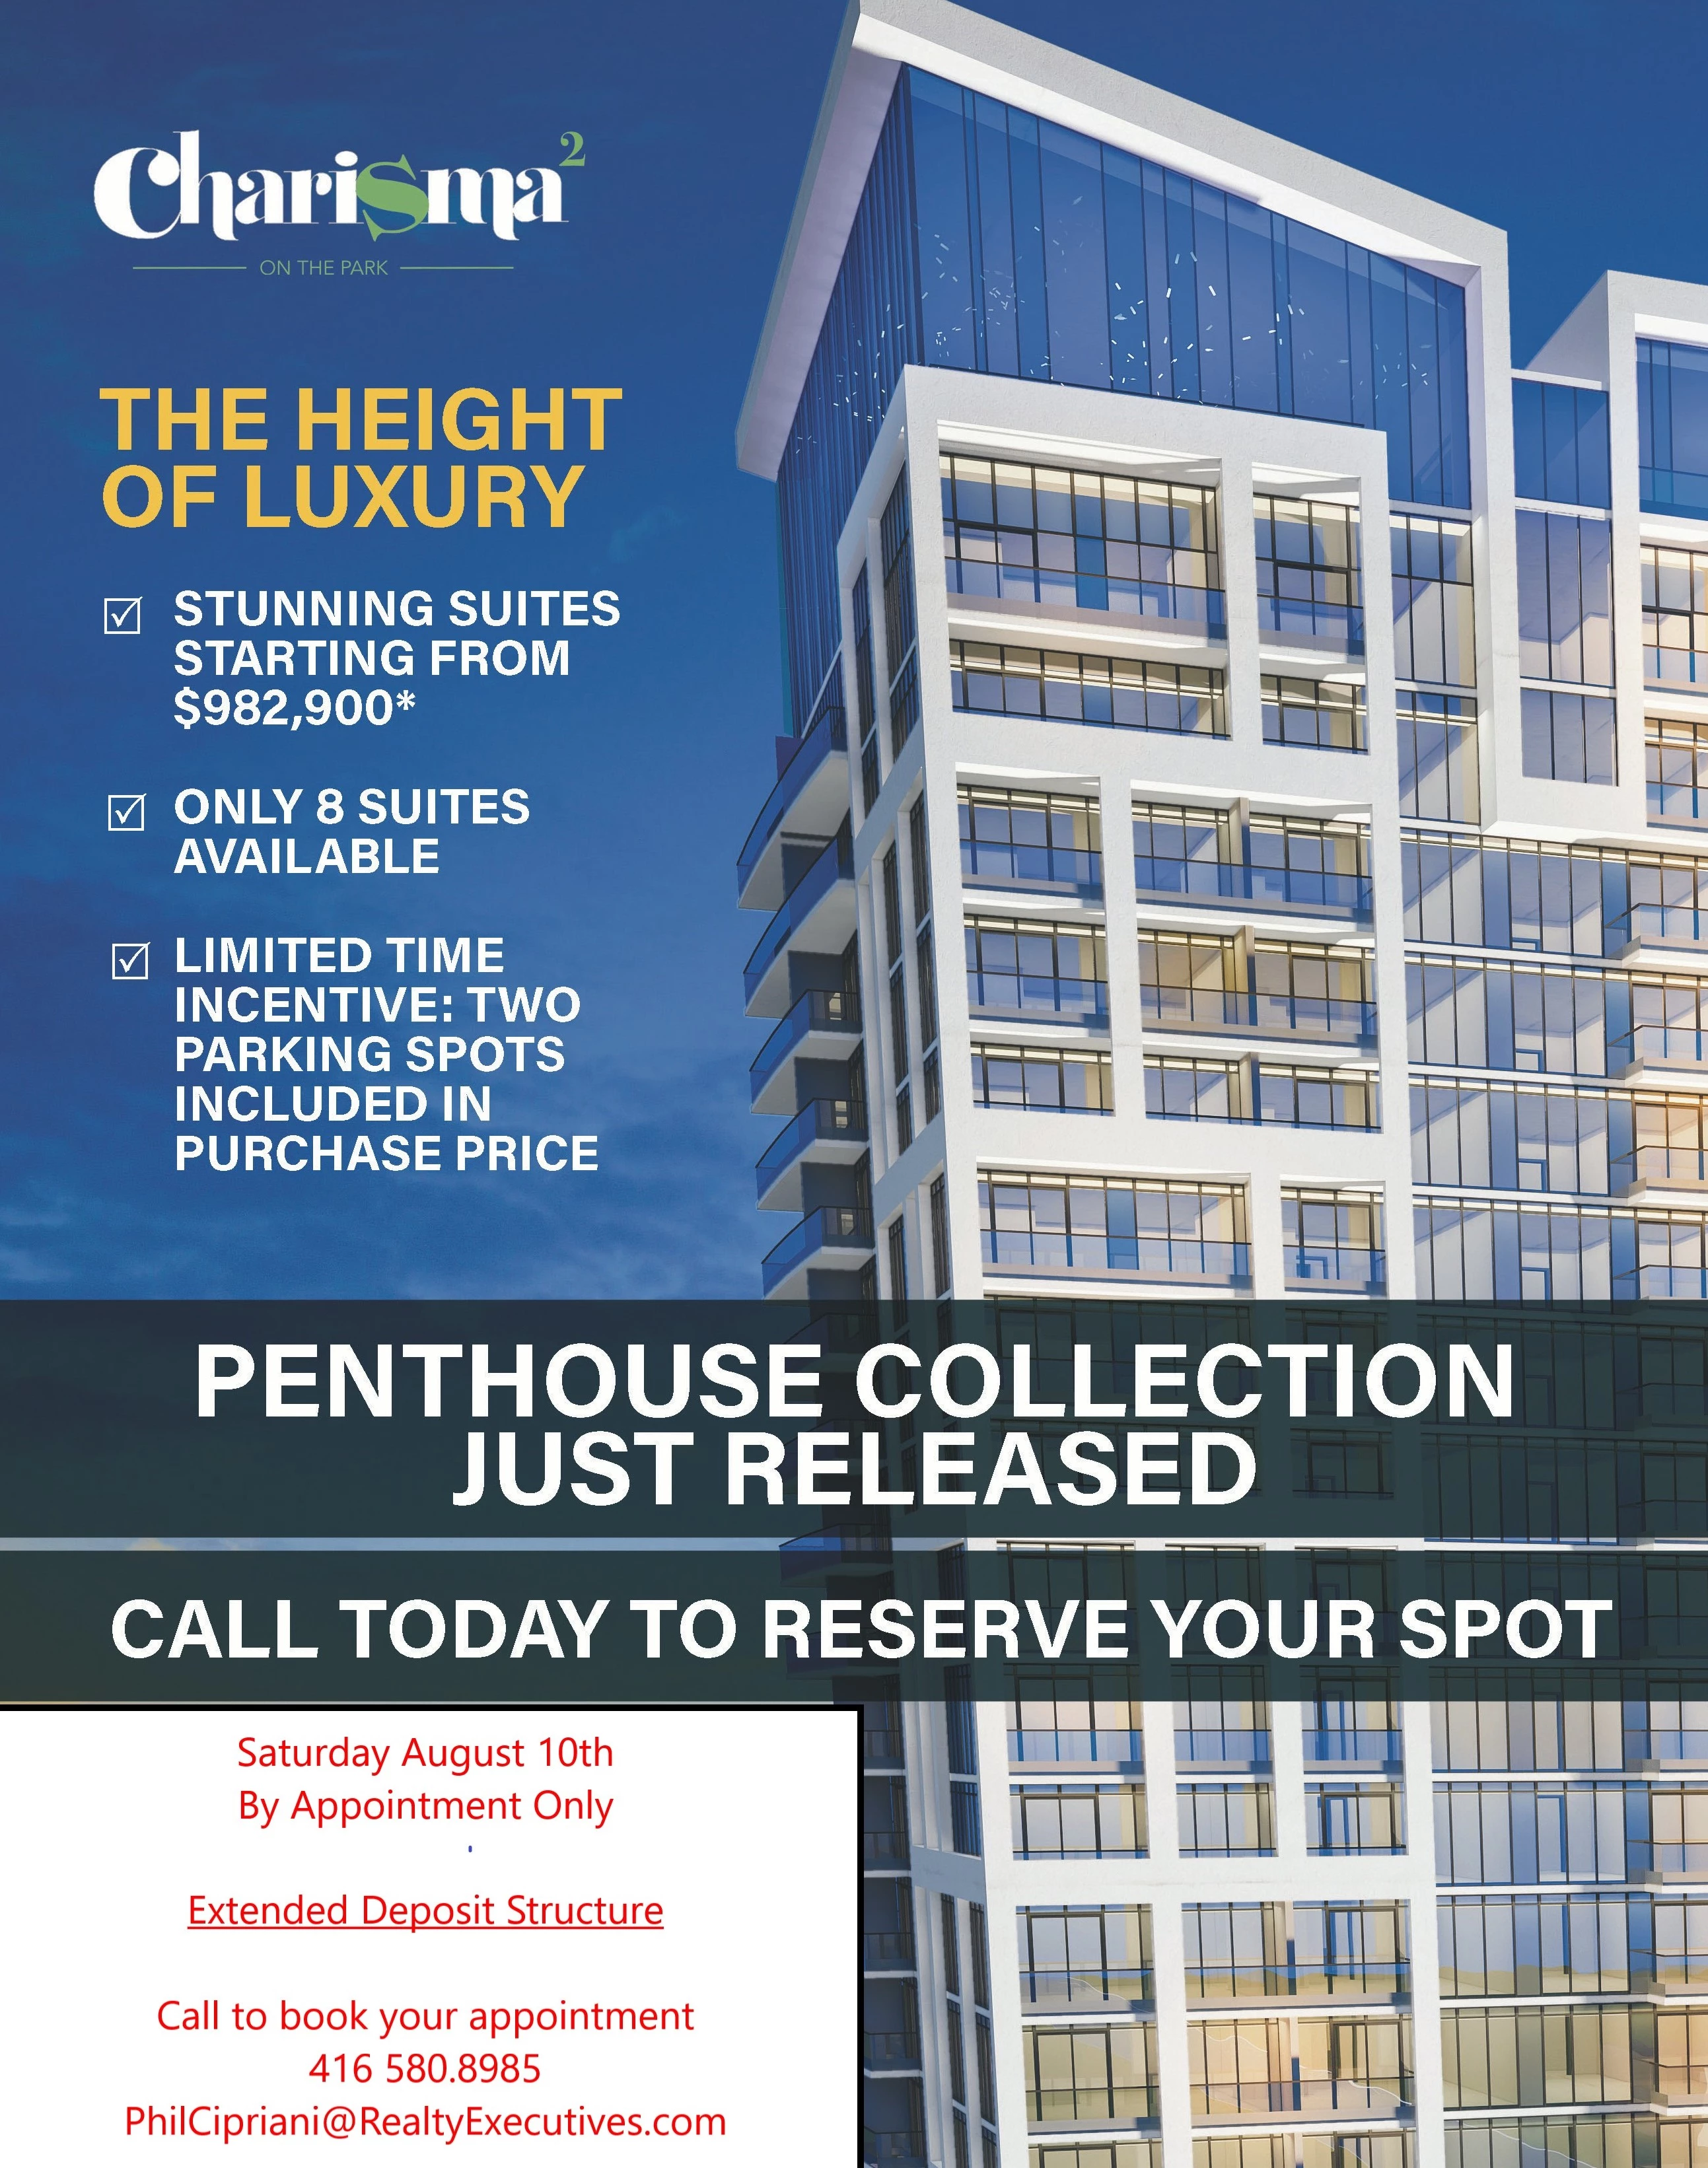 184225863283289-penthouse-released-to-send-15651851351596.jpg